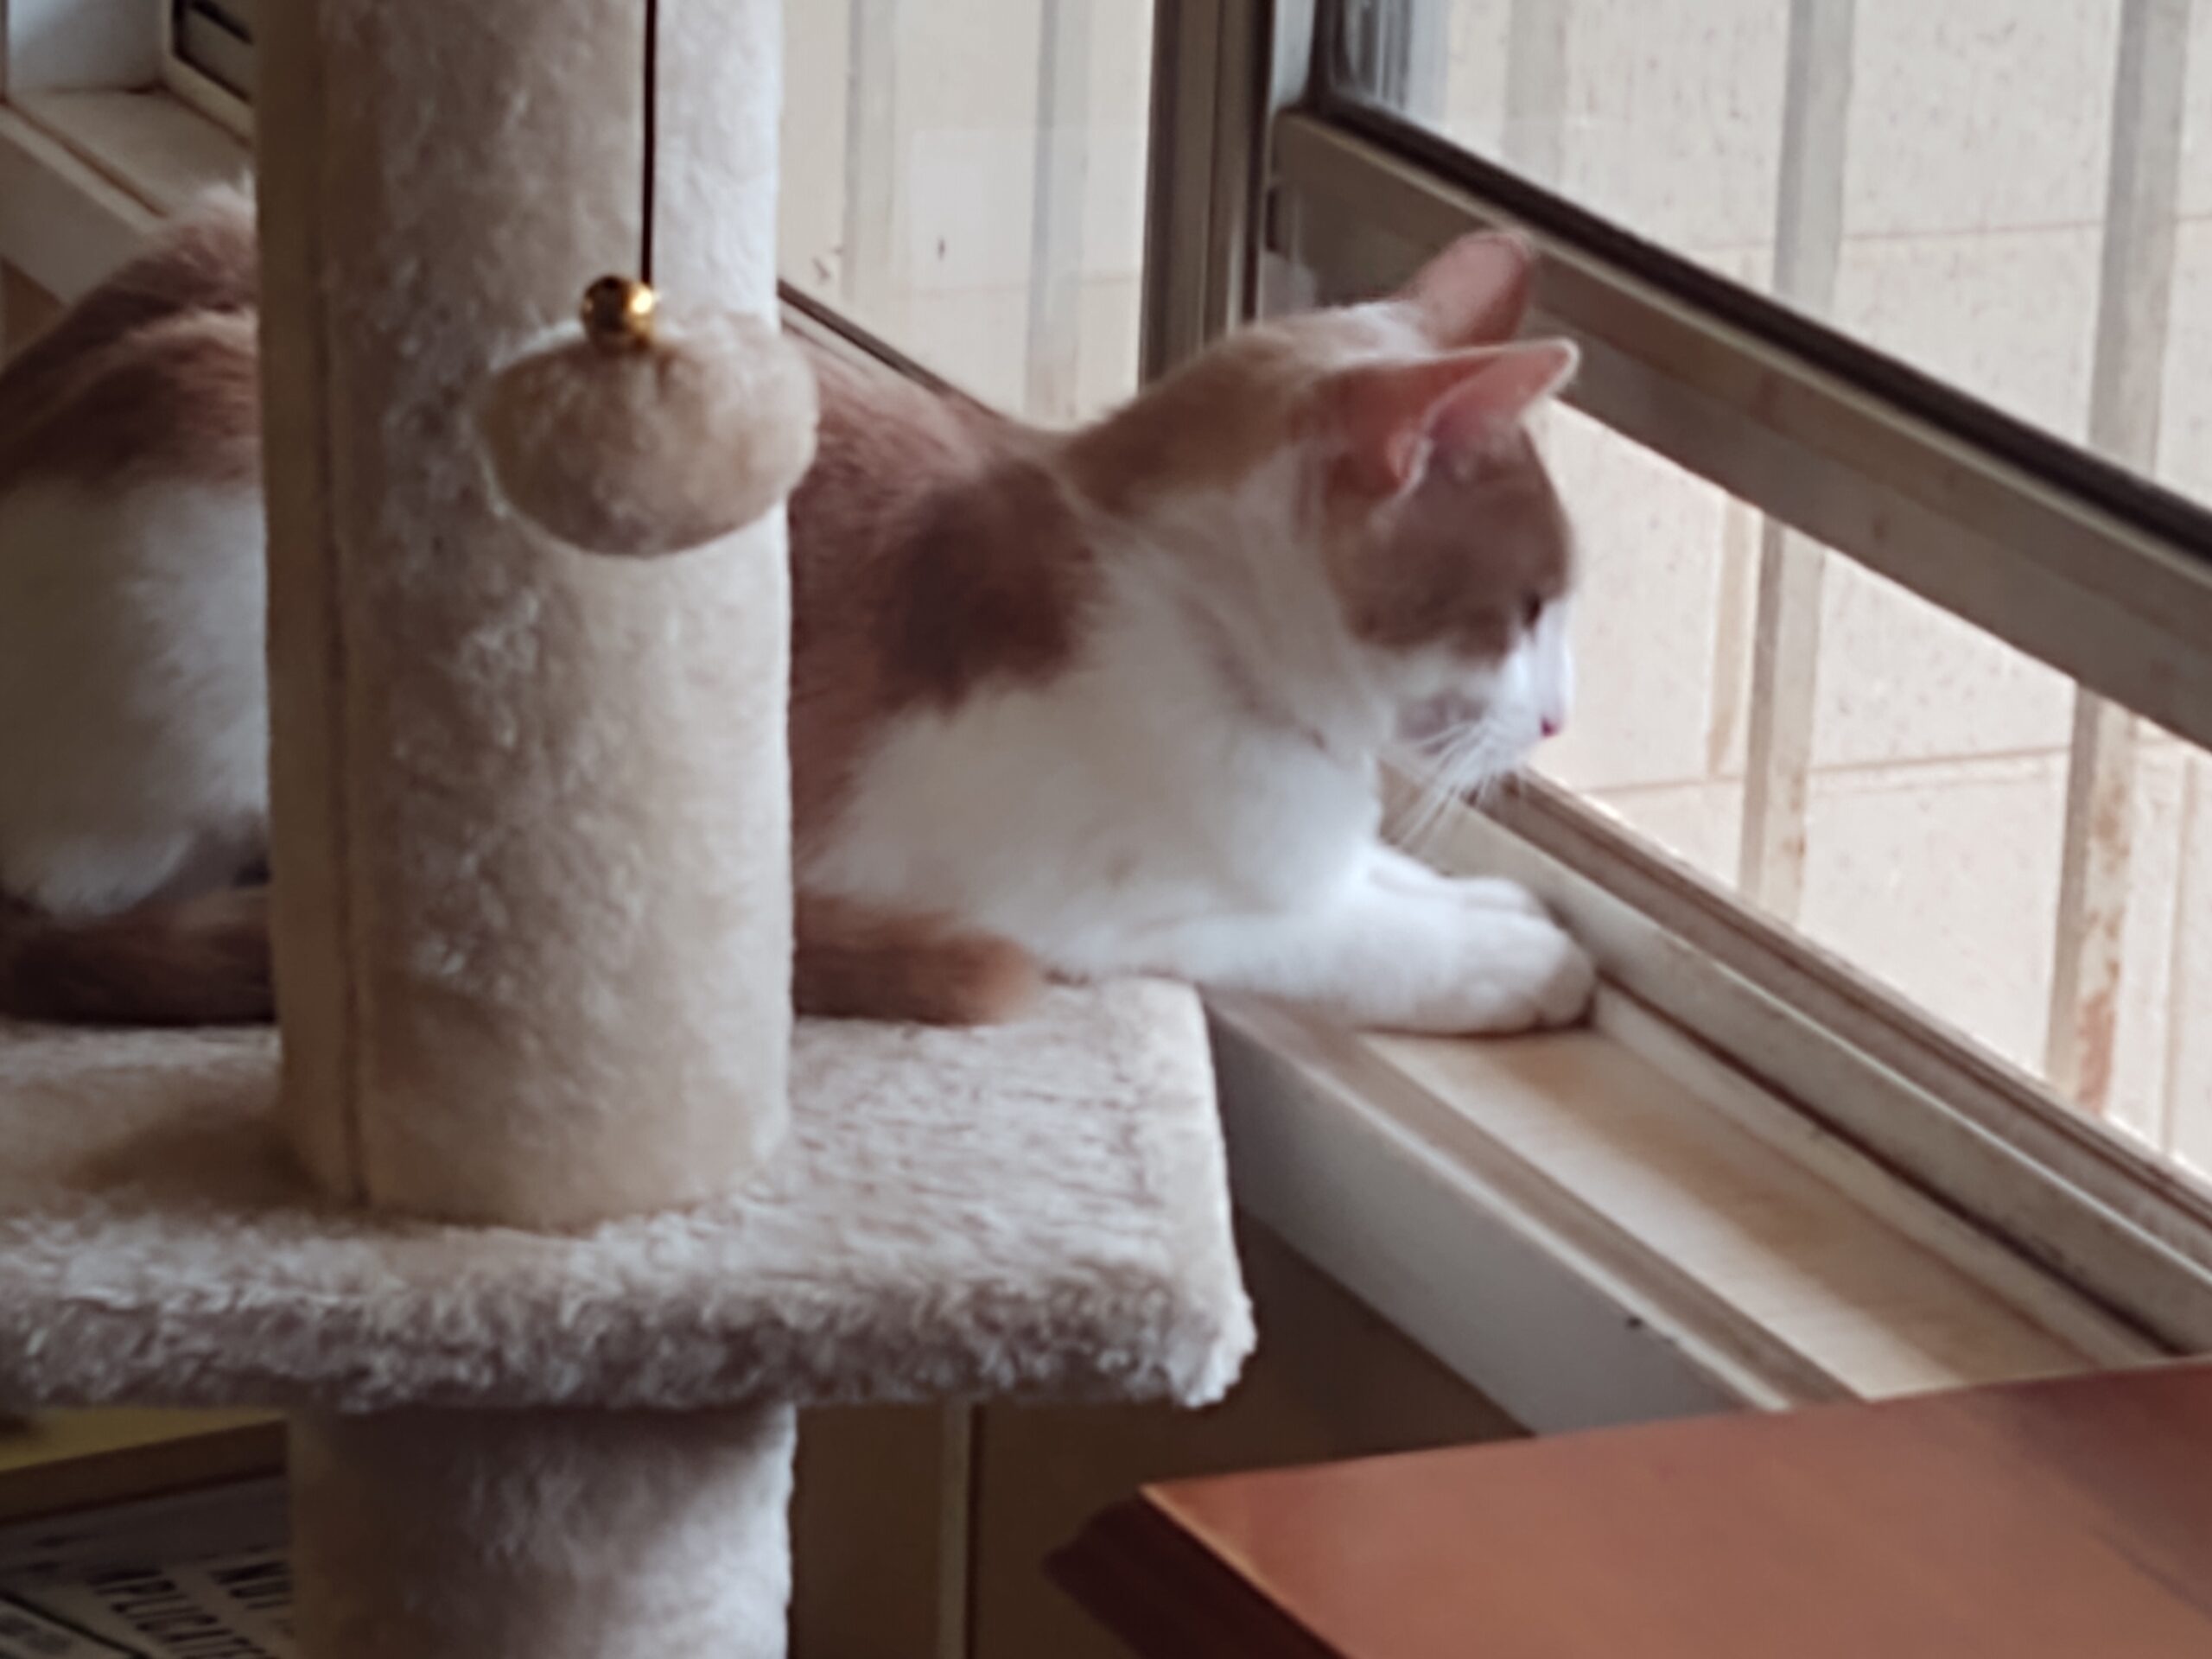 My baby girl watching the birds and outdoor cats through the window.